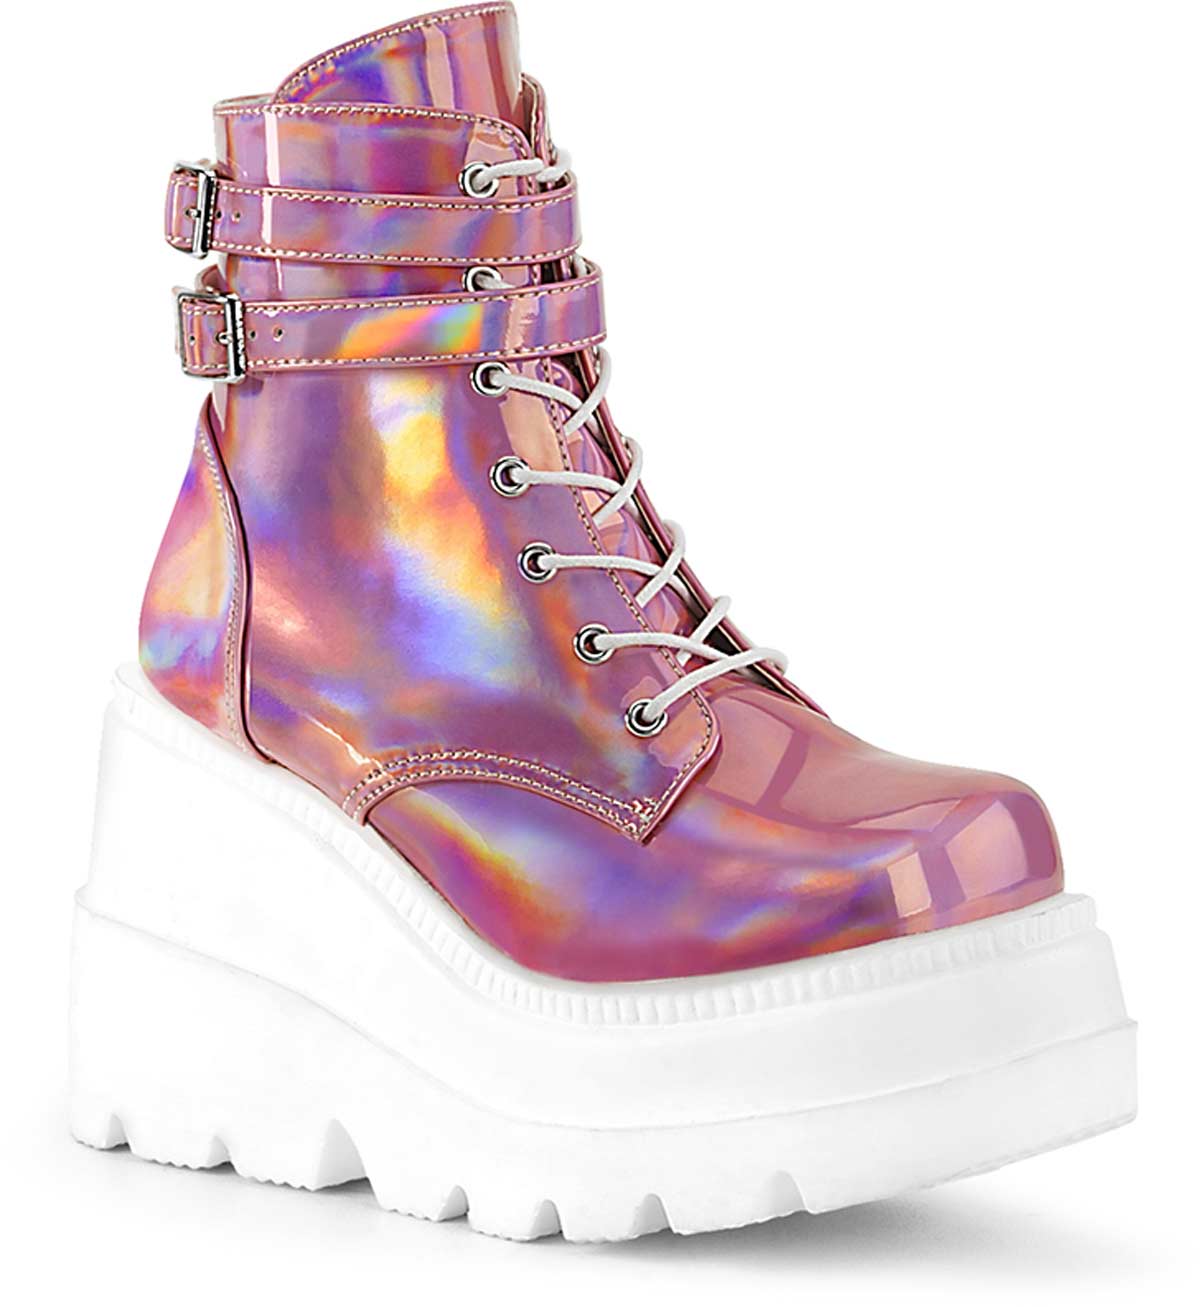 Pleaser Shaker-52 - Pink Hologram Pat in Sexy Boots - $81.95